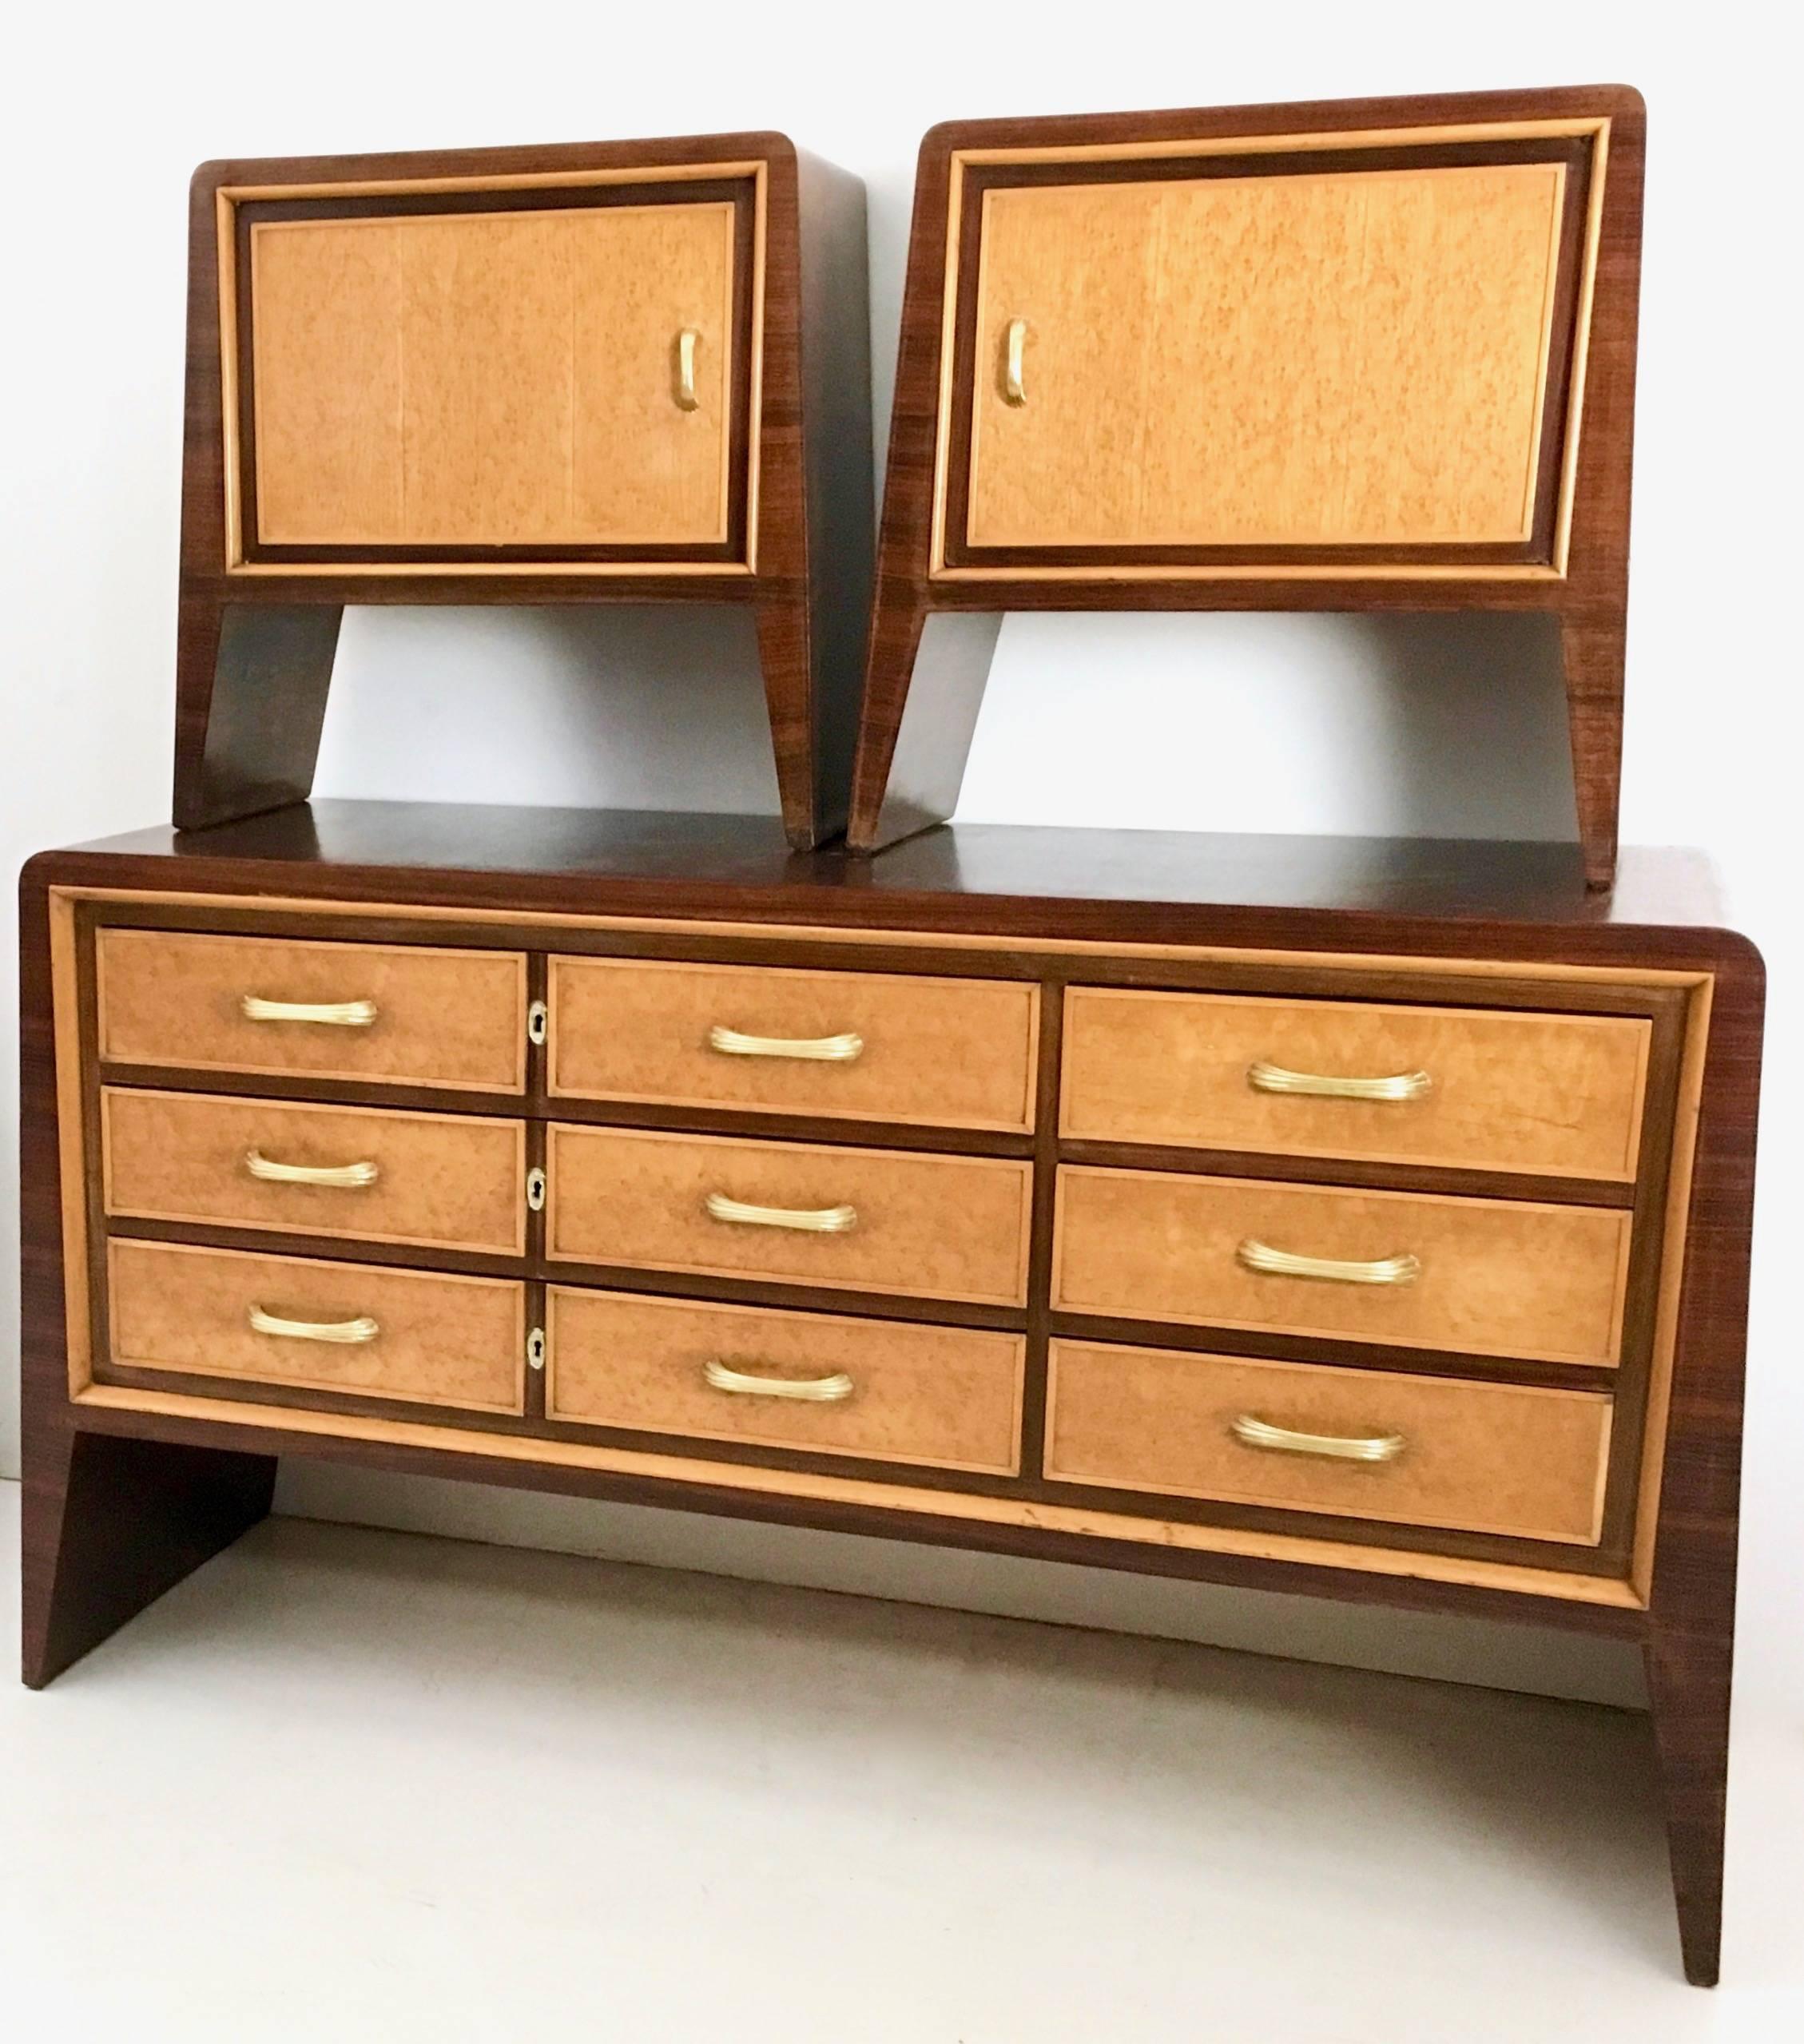 This beautiful dresser is made in mahogany veneer and maple, and features brass handles. 
In good original condition with its original patina.
It doesn't need to be restored.

Related pieces are illustrated by Luca Scacchetti, Guglielmo Ulrich,